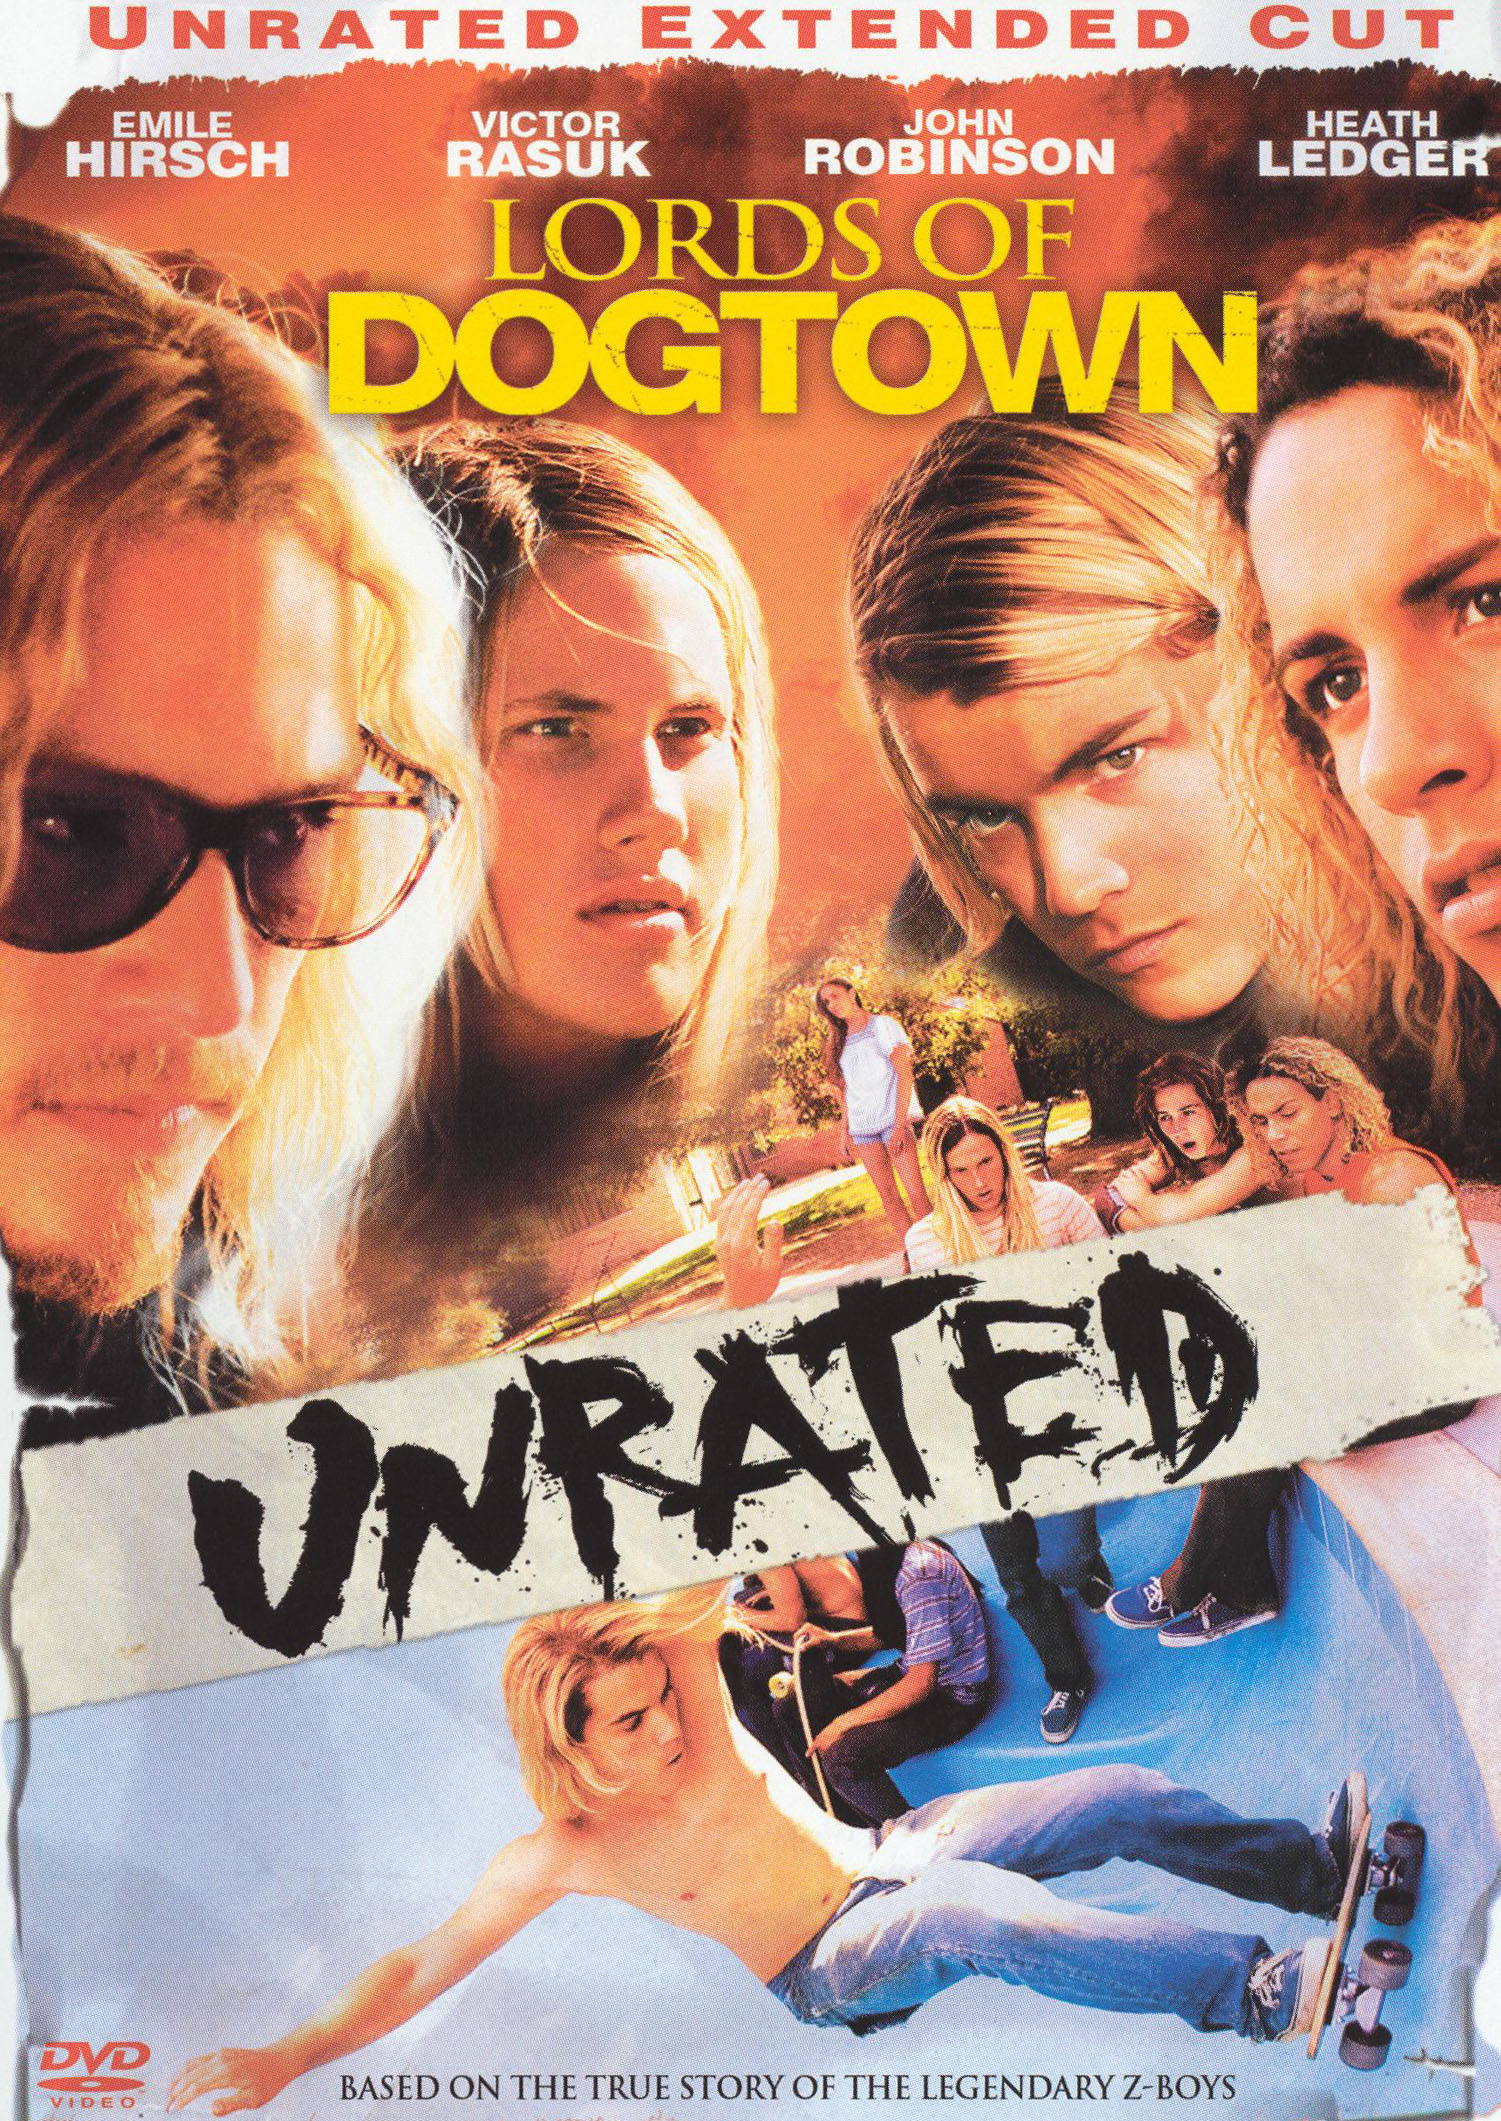 Dogtown Lords Of Dogtown DVD in stock at SPoT Skate Shop